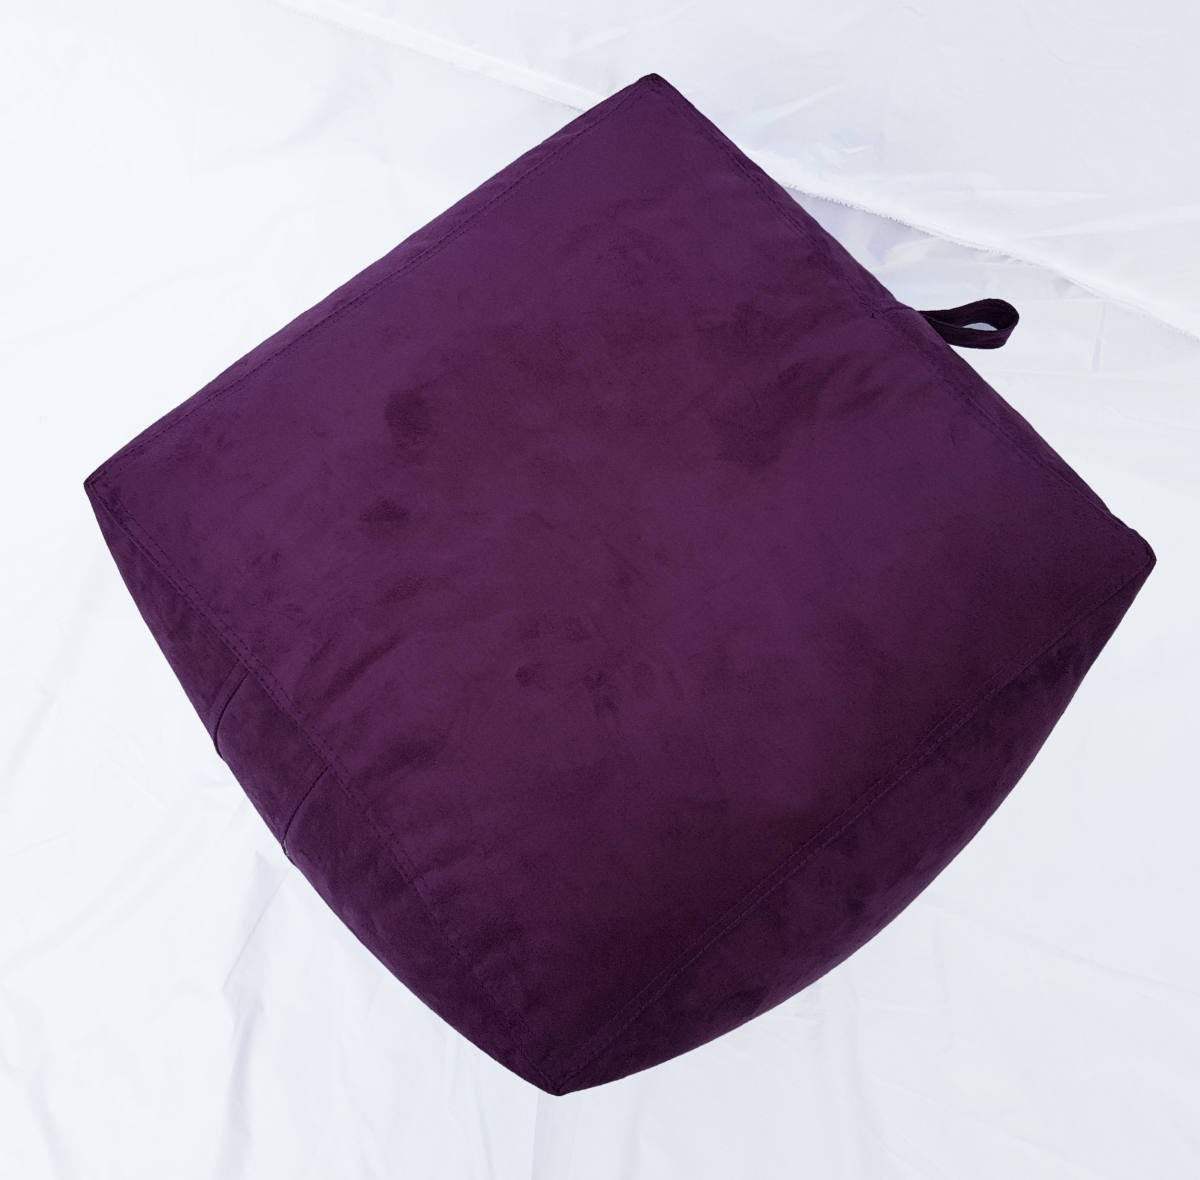 Square Shape Suede Leather Foot Stool Bean Bag 40 x 40 x 40 cm - Relaxsit